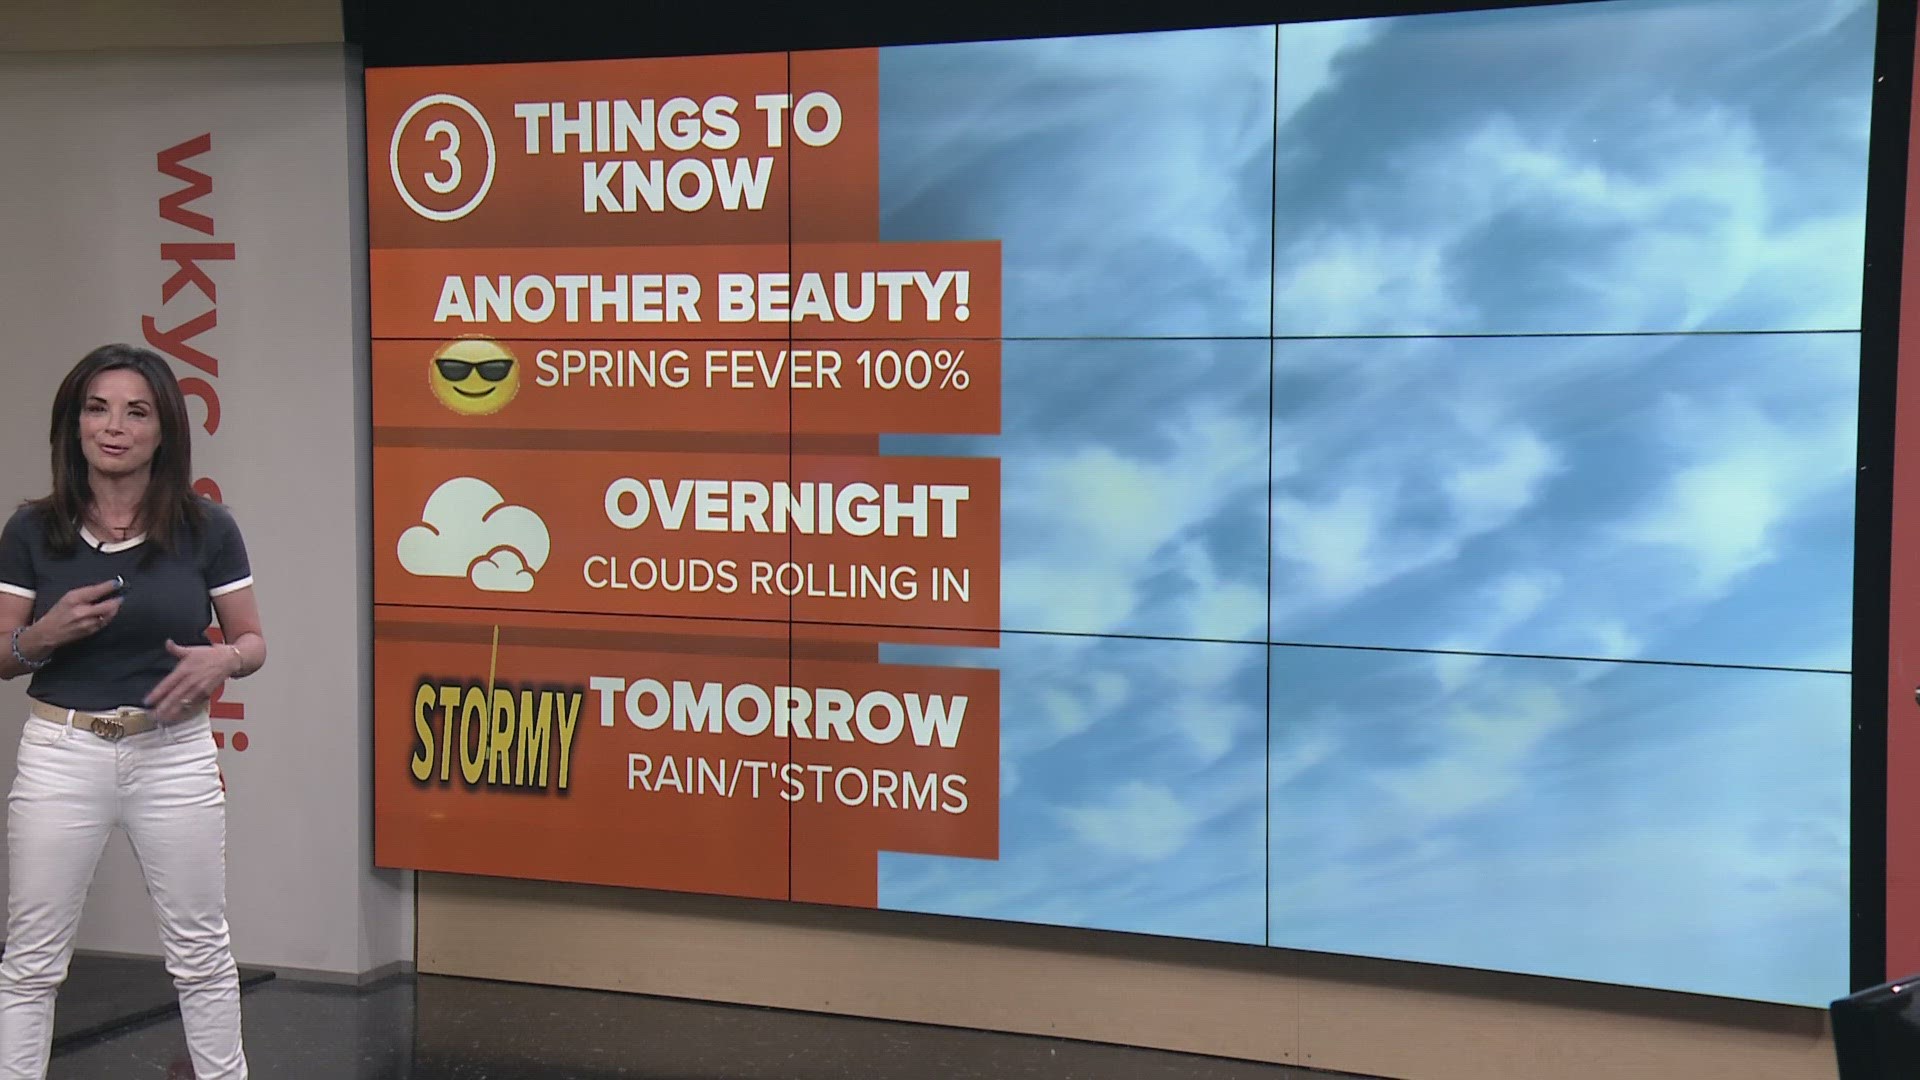 We could have some severe weather across Northeast Ohio tomorrow.